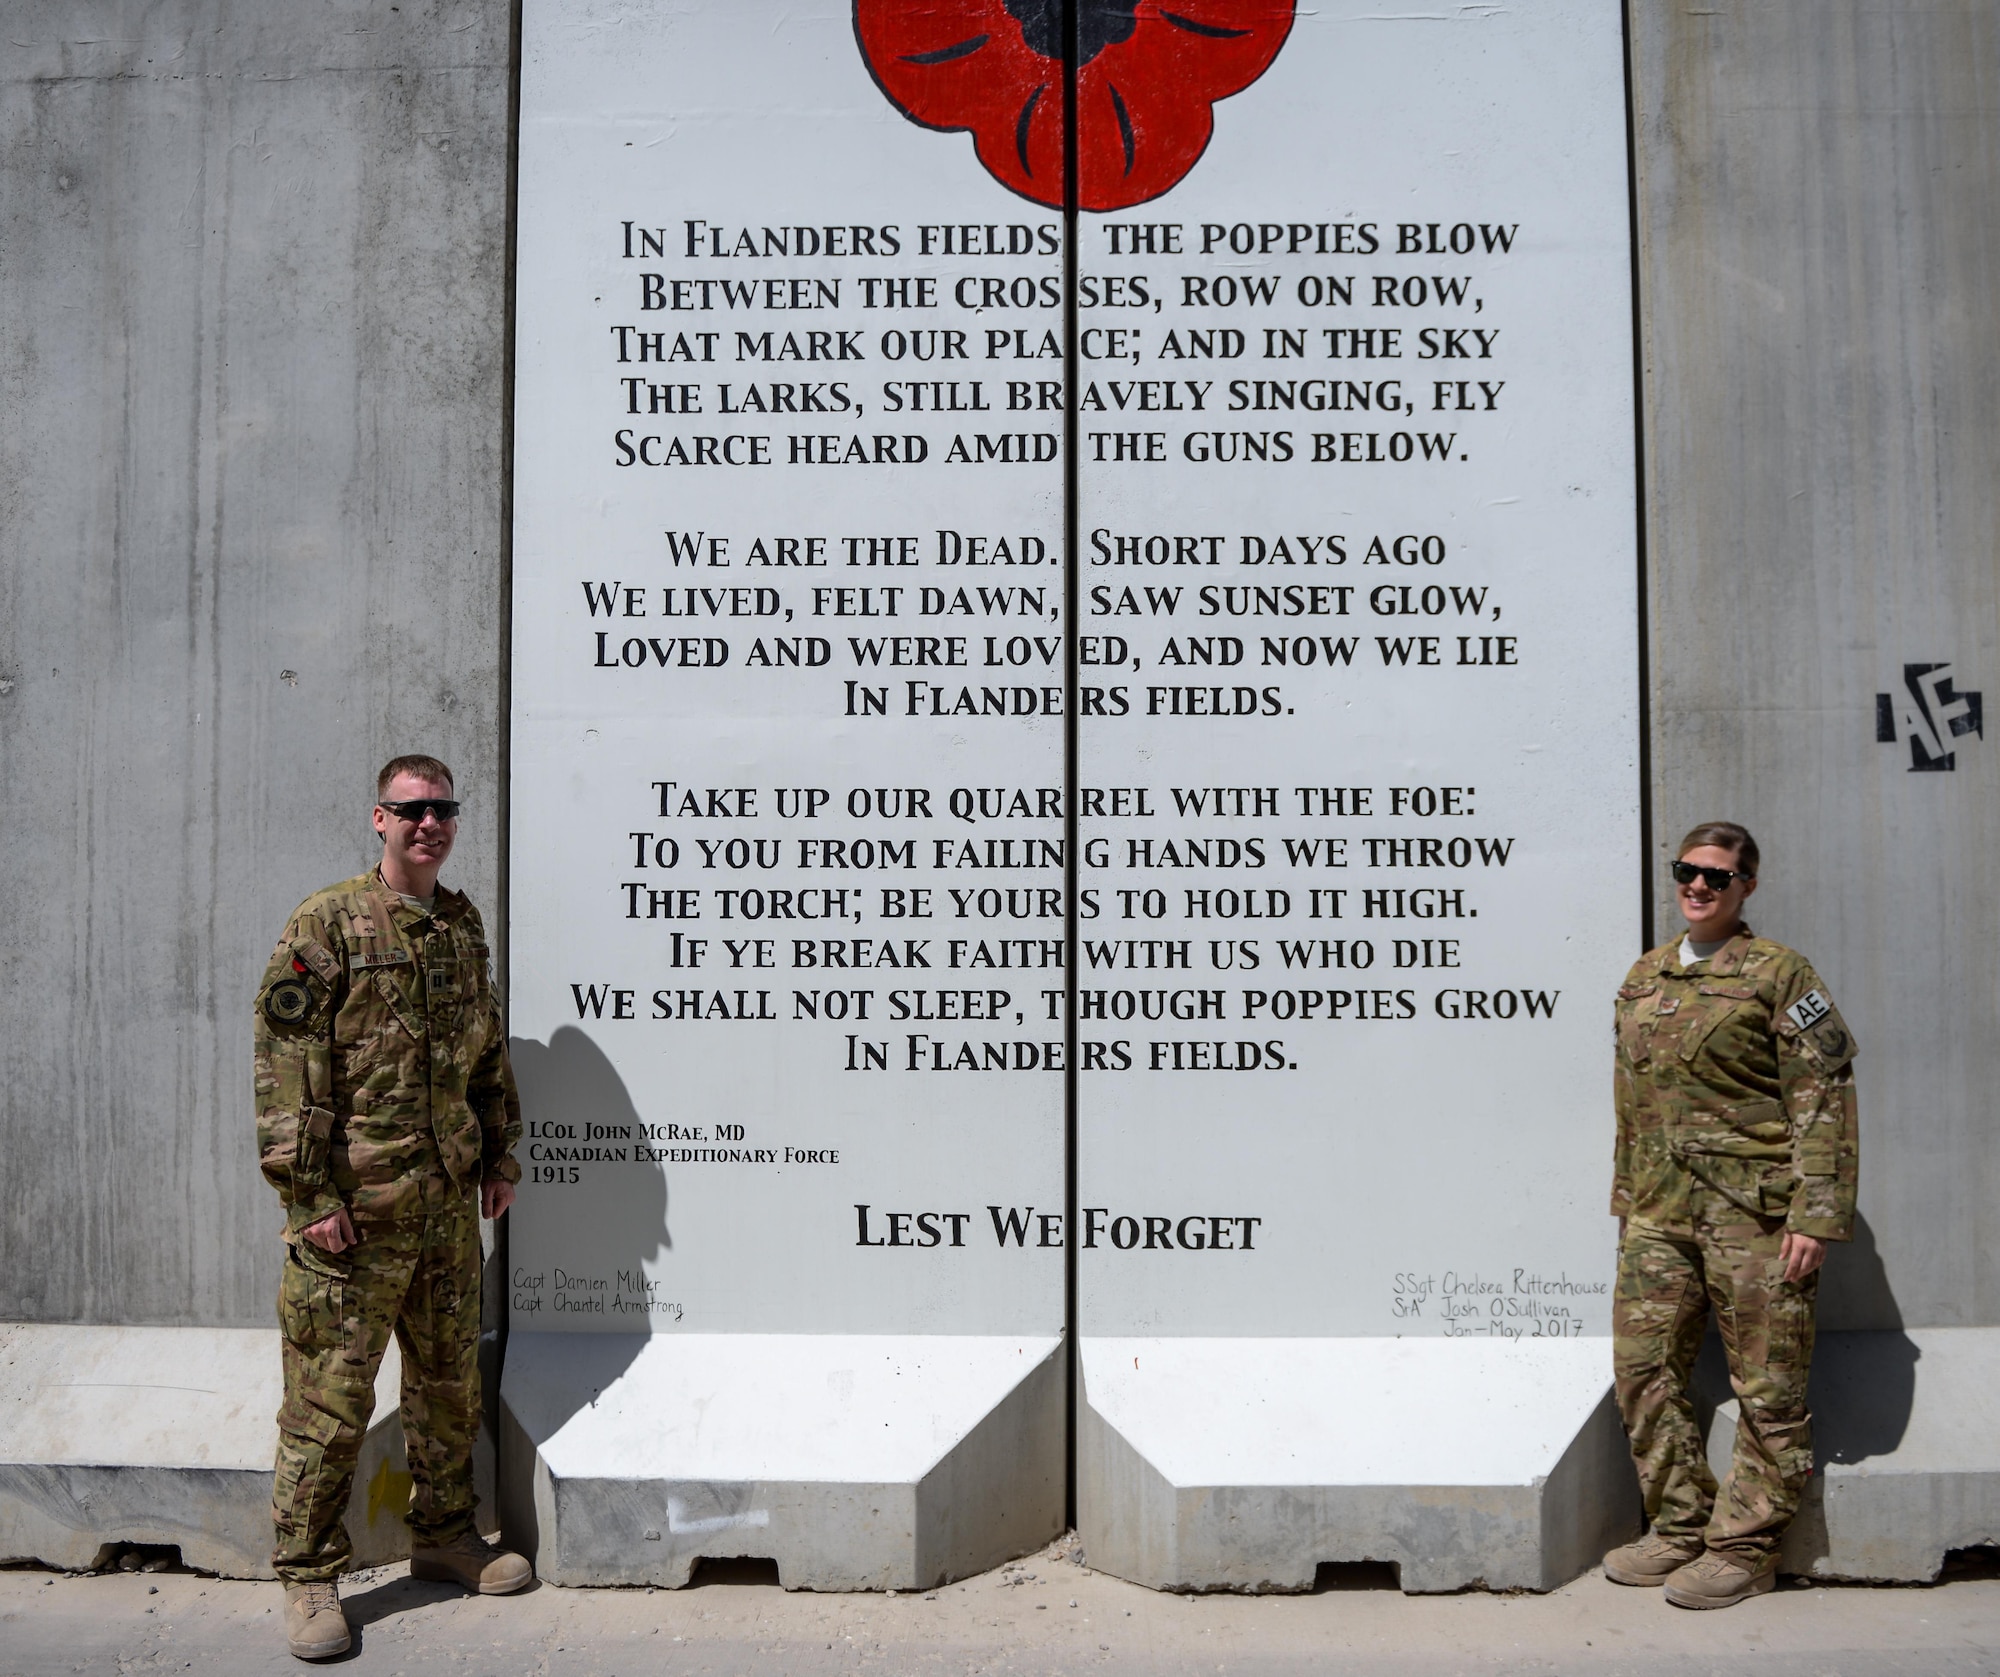 Royal Canadian Air Force Capt. Damien Miller and U.S Air Force Staff Sgt. Chelsea Rittenhouse, of the 455th Expeditionary Aeromedical Evacuation Squadron, stand in front of their artwork at Bagram Airfield, Afghanistan. The design, drafted by Miller, depicts a red poppy above the storied poem, "In Flanders Fields." The poem and poppy have become symbols of remembrance in Commonwealth nations. The poem was originally written by Canadian Expeditionary Force Lt. Col. John McCrae following the Second Battle of Ypres in World War I, 1915. (U.S. Air Force photo by Capt. Keenan Kunst)